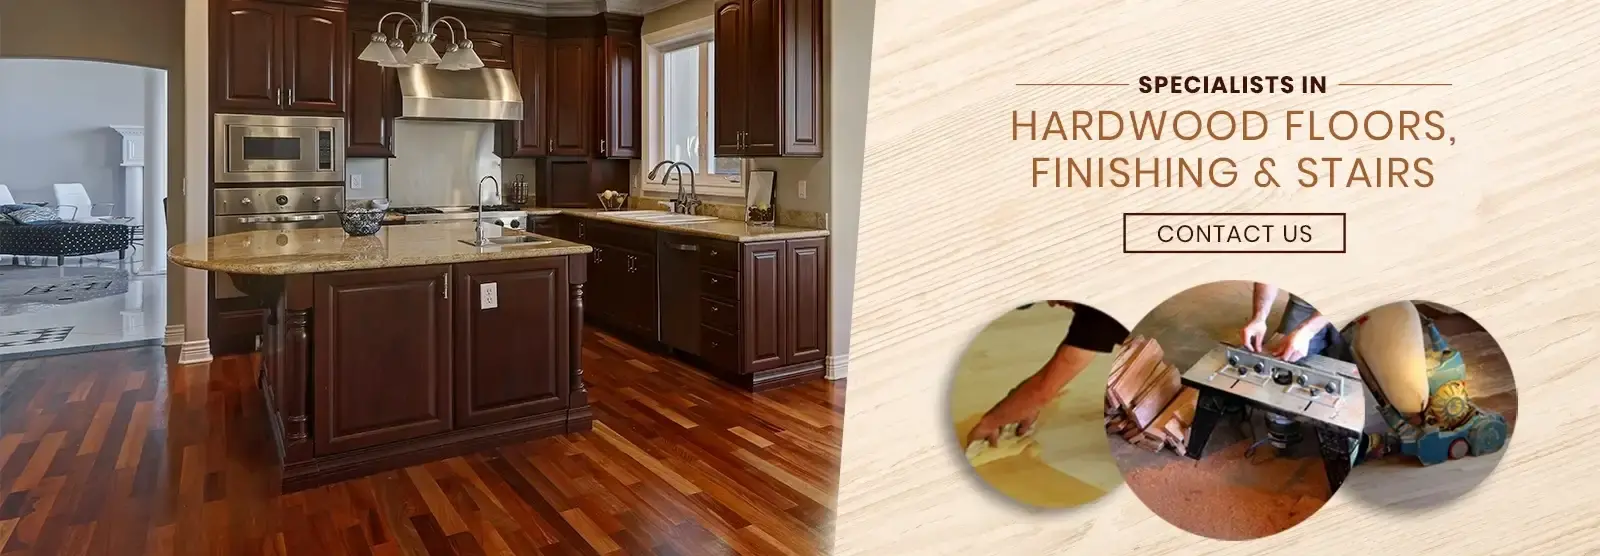 Specialists in Hardwood Floors, Finishing and Stairs - Al Havner and Sons Hardwood Flooring